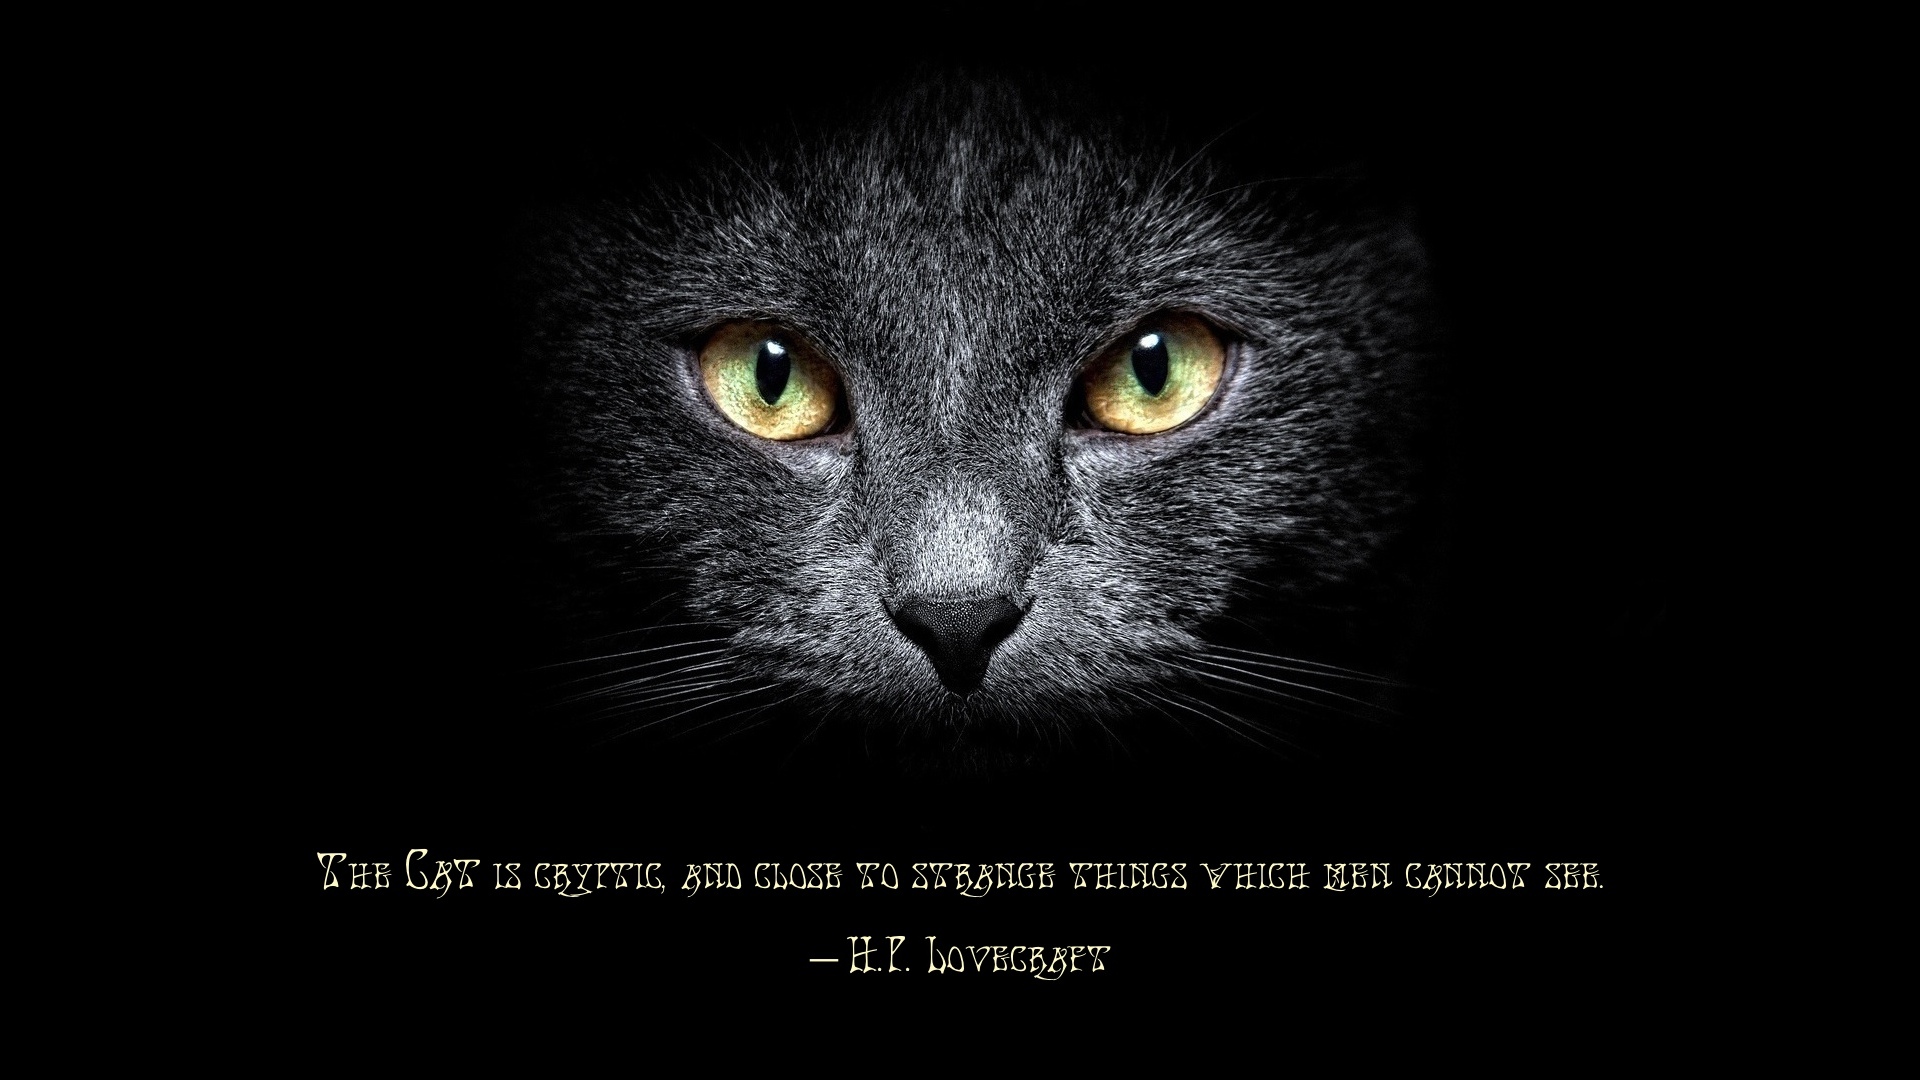 h p lovecraft, misc, quote, cat cellphone